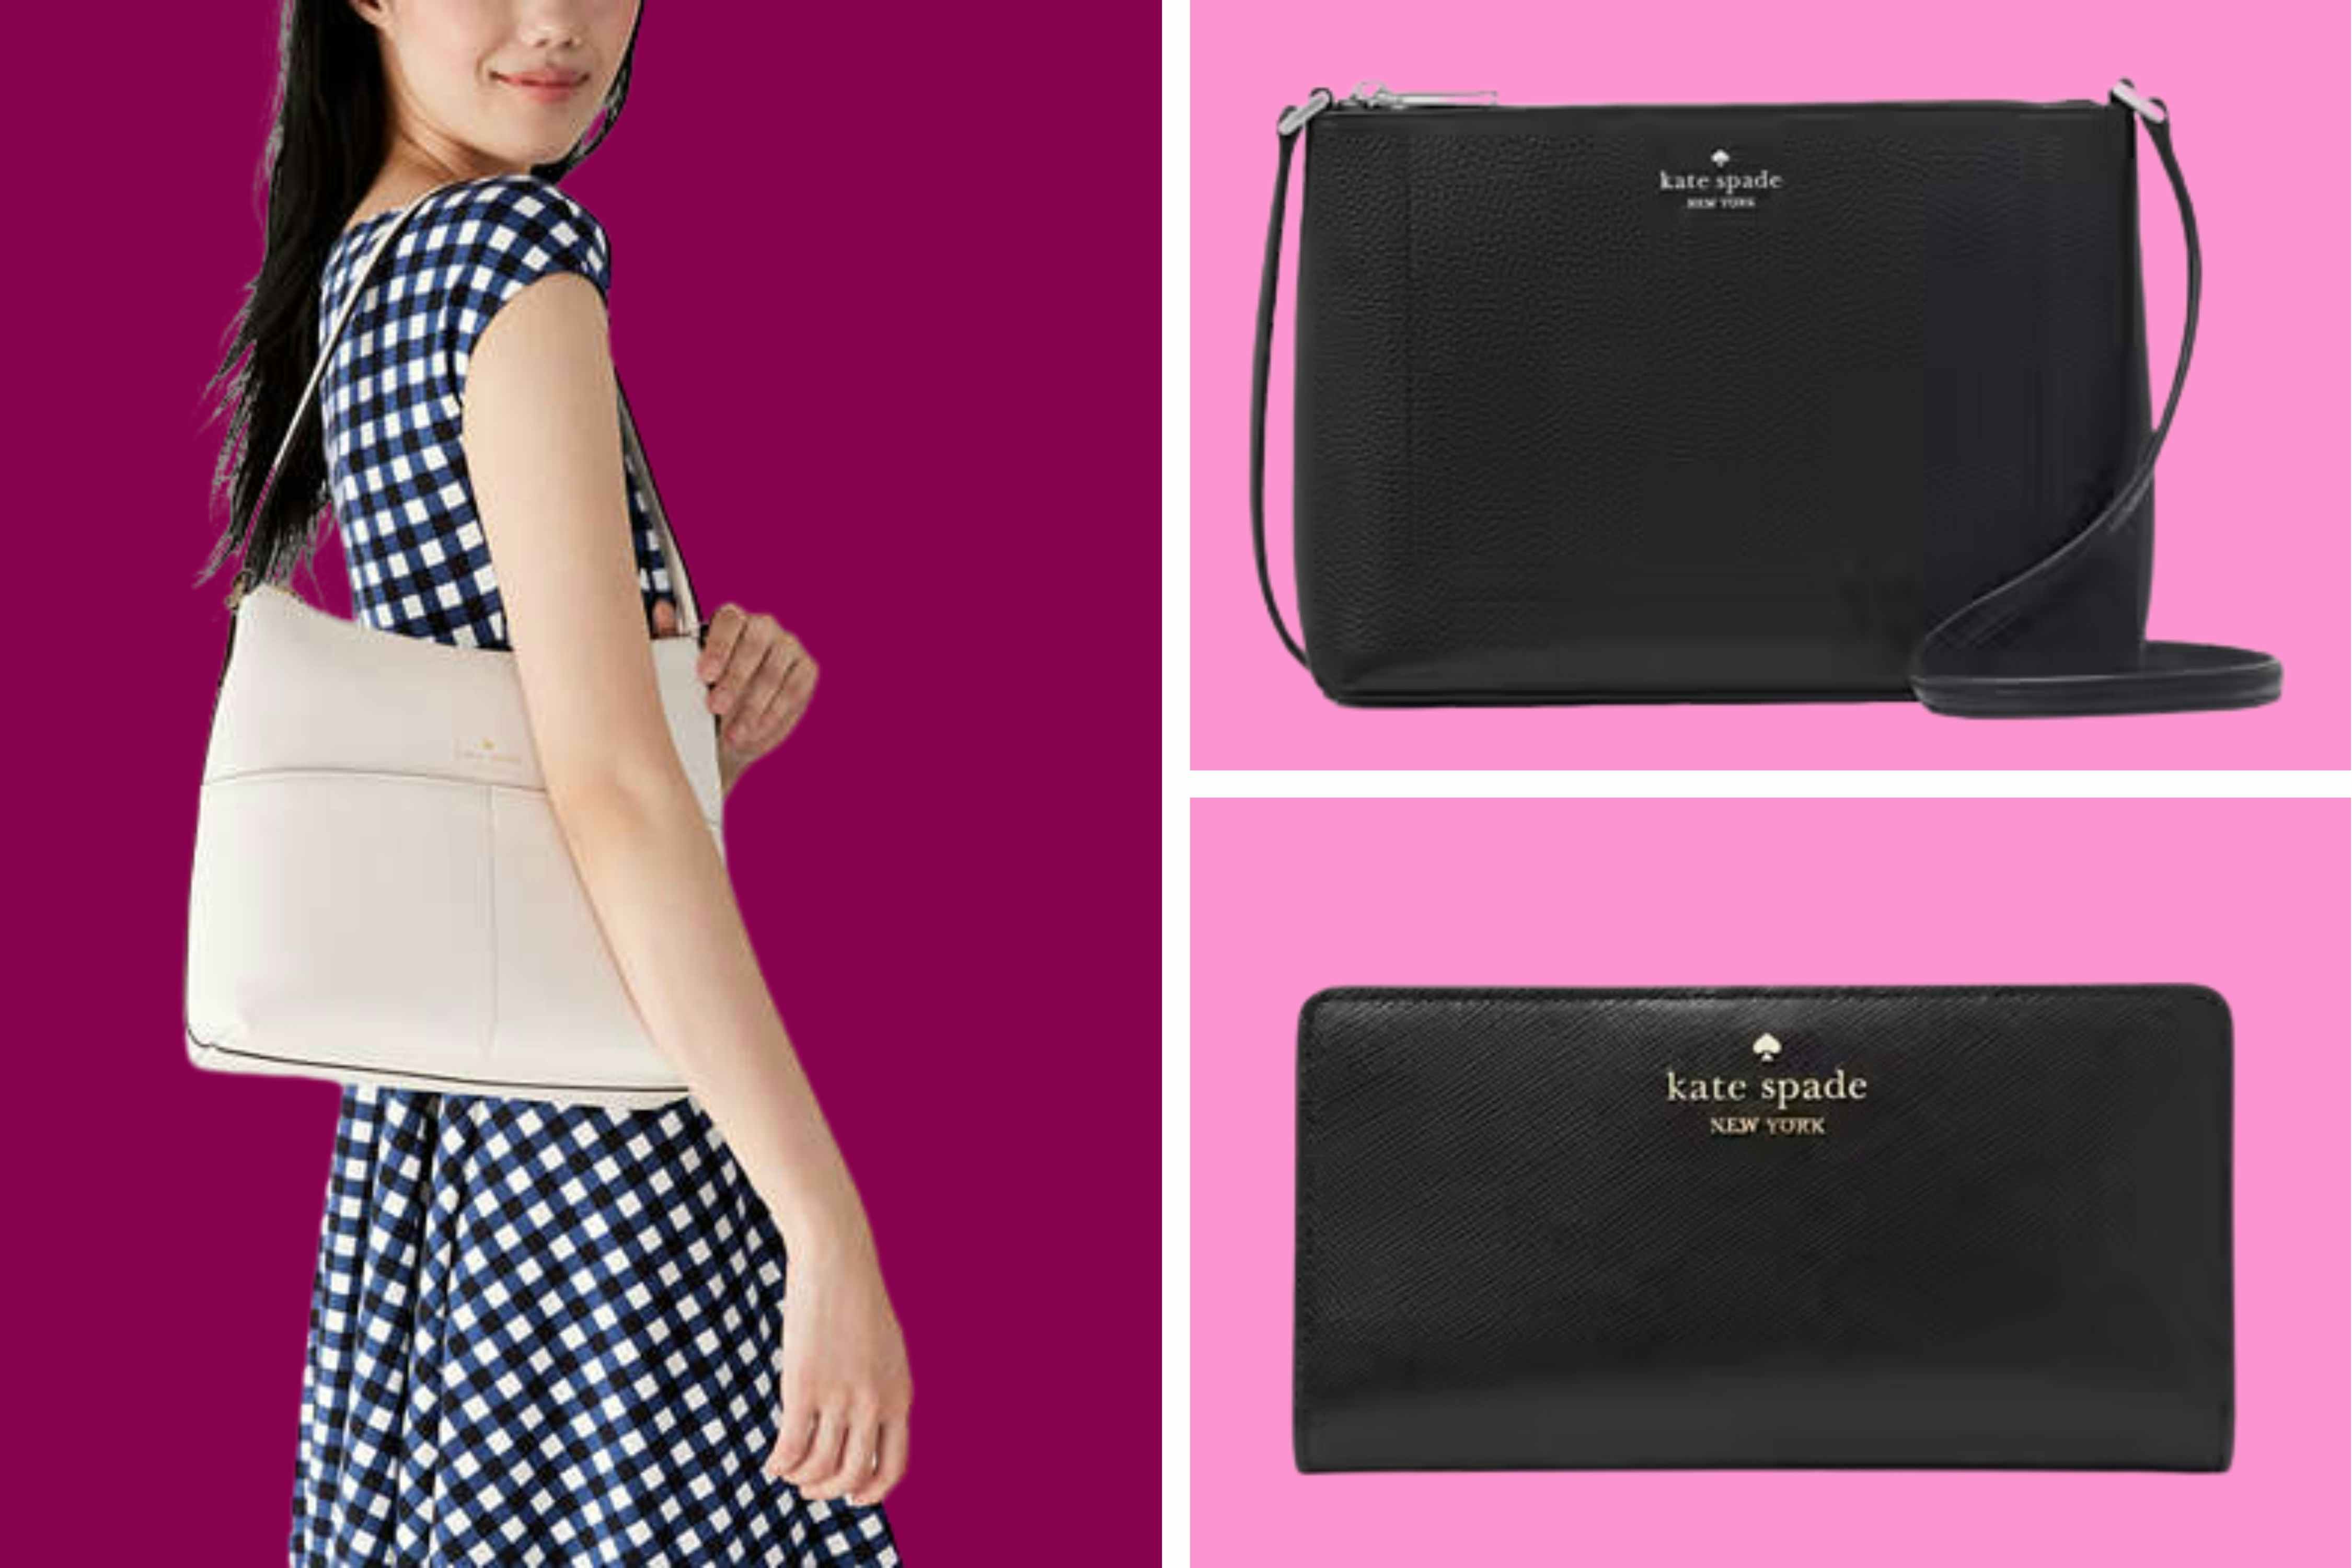 Save at Kate Spade: $19 Earrings, $44 Bifold Wallet, $79 Tote, and More